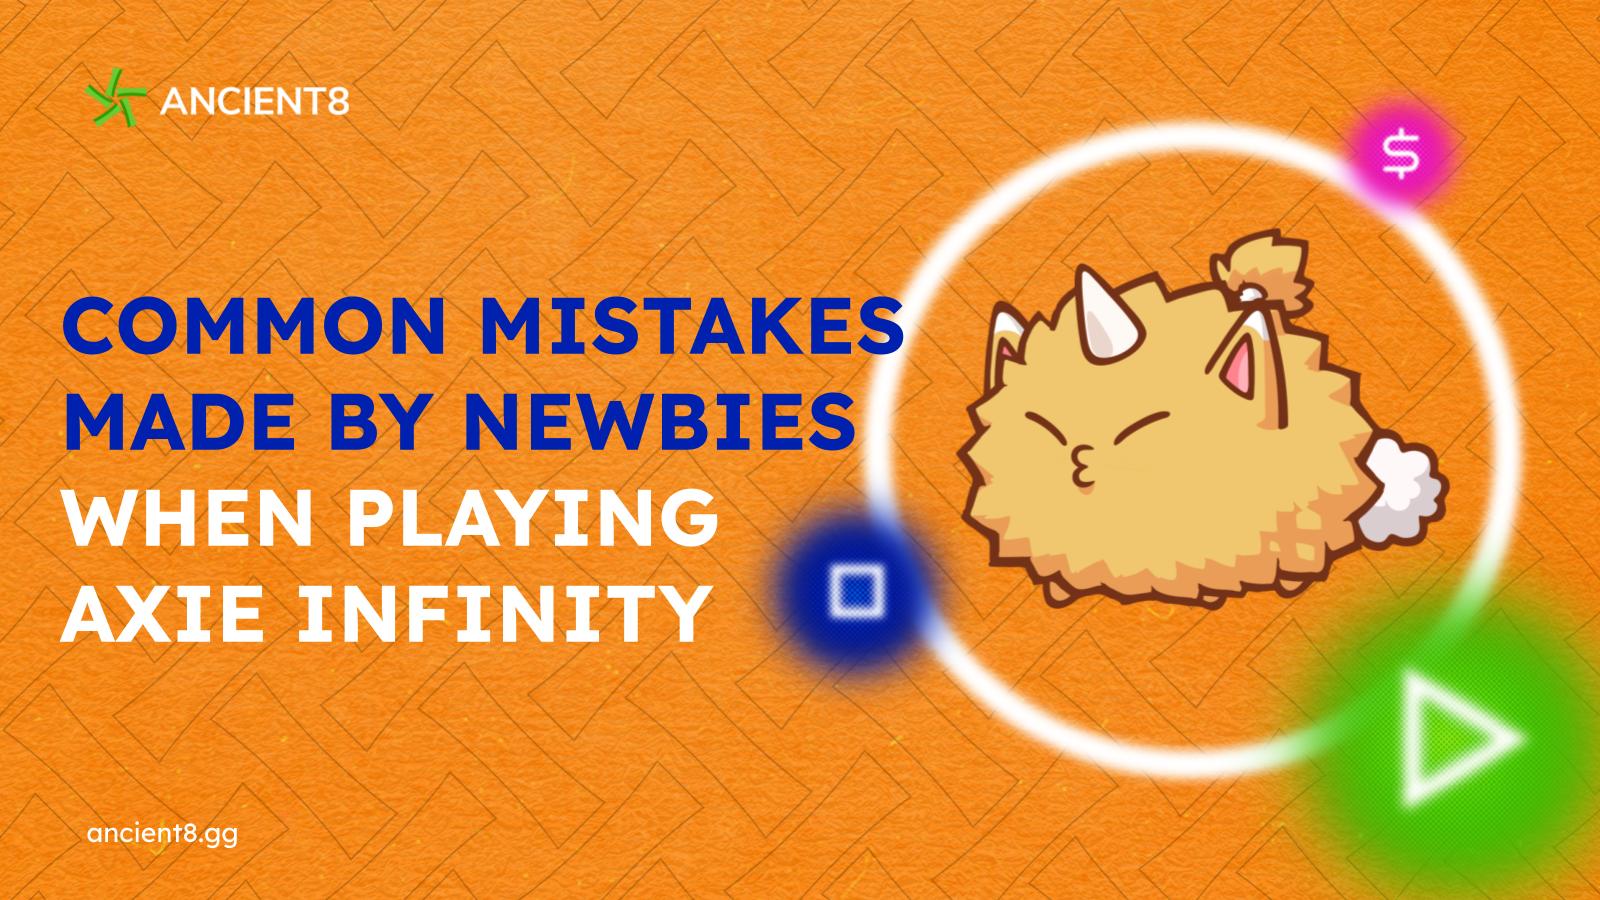 Common mistakes made by newbies when playing Axie Infinity